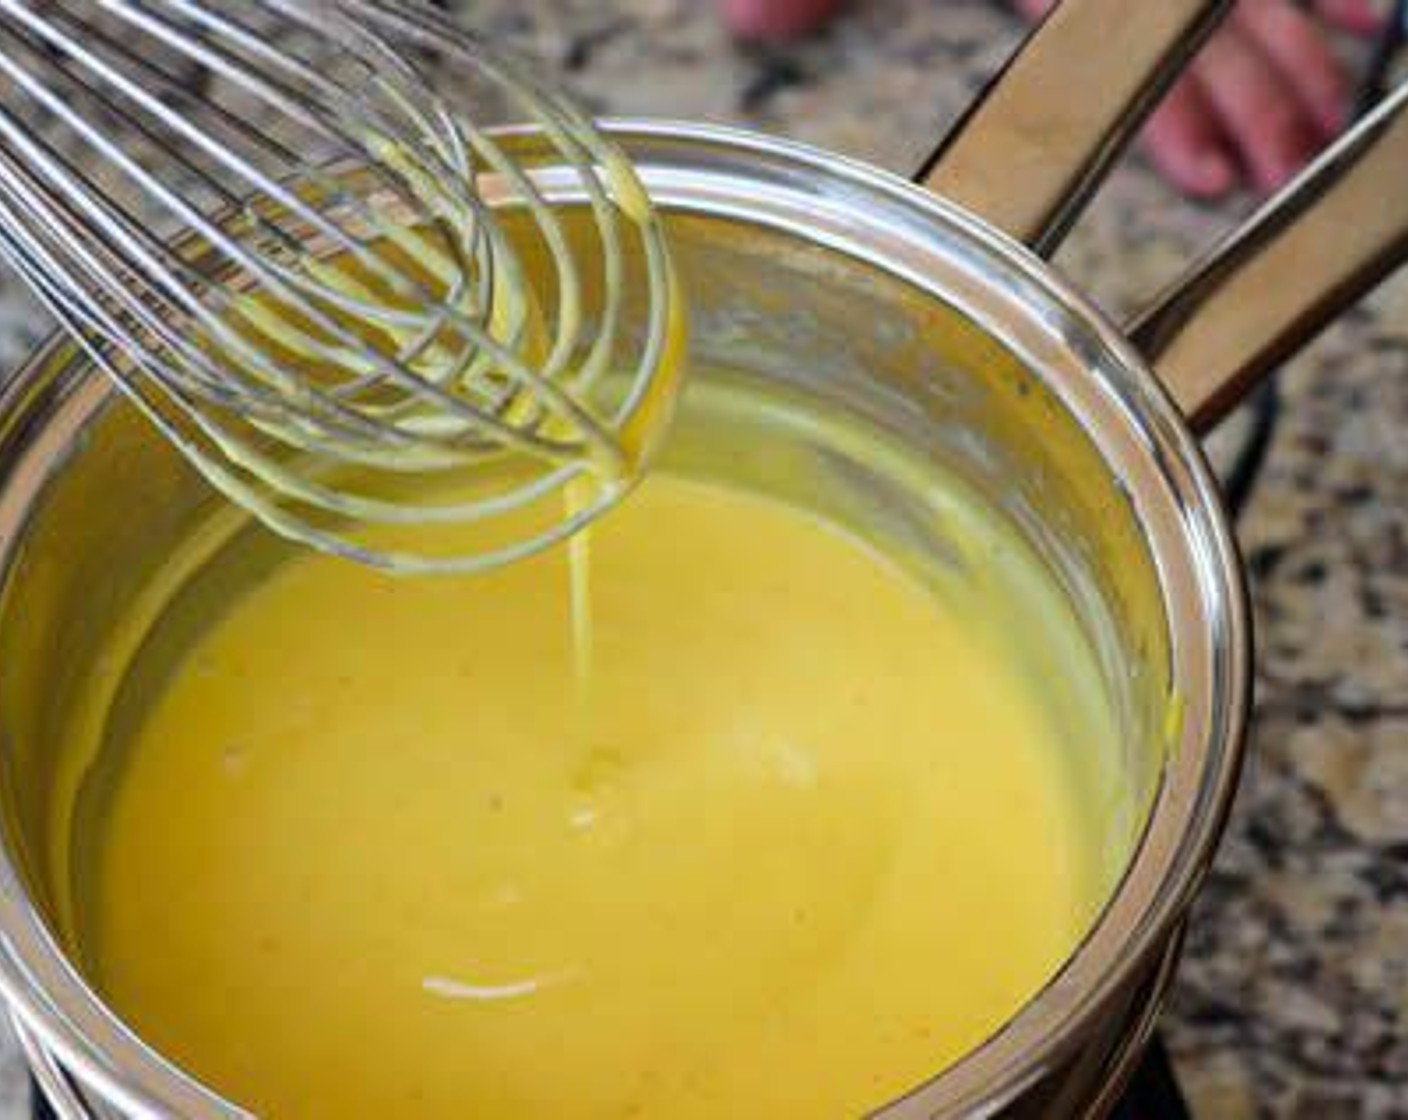 step 4 Place over double boiler and slowly whisk in Unsalted Butter (1/2 cup) a little at a time careful not to cook the eggs. Mixture will begin to thicken after a few minutes of whisking. Add Cayenne Pepper (1/4 tsp) and Salt (1 pinch) and keep warm until ready to serve.